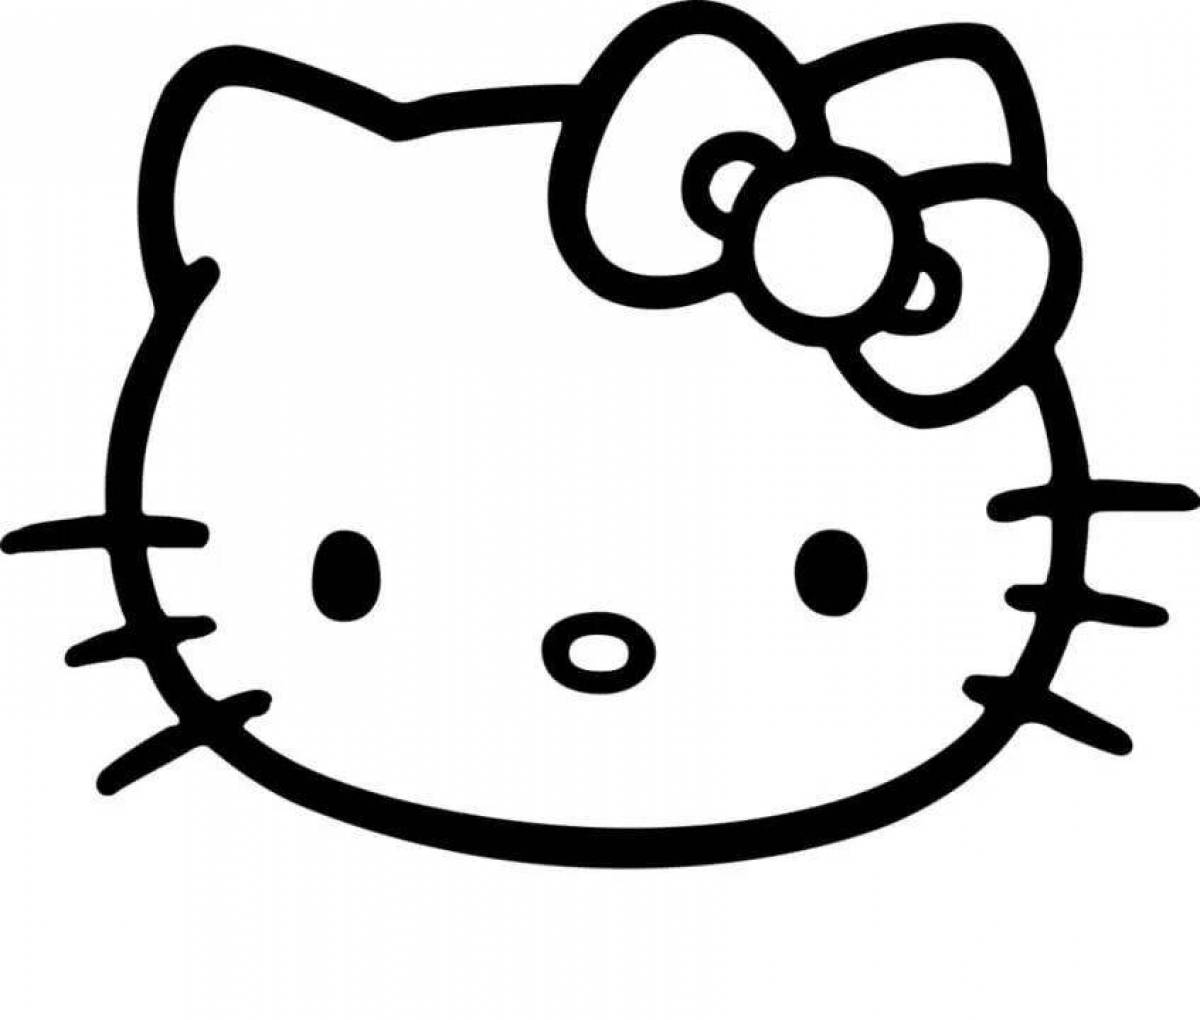 Coloring page of hello kitty stickers